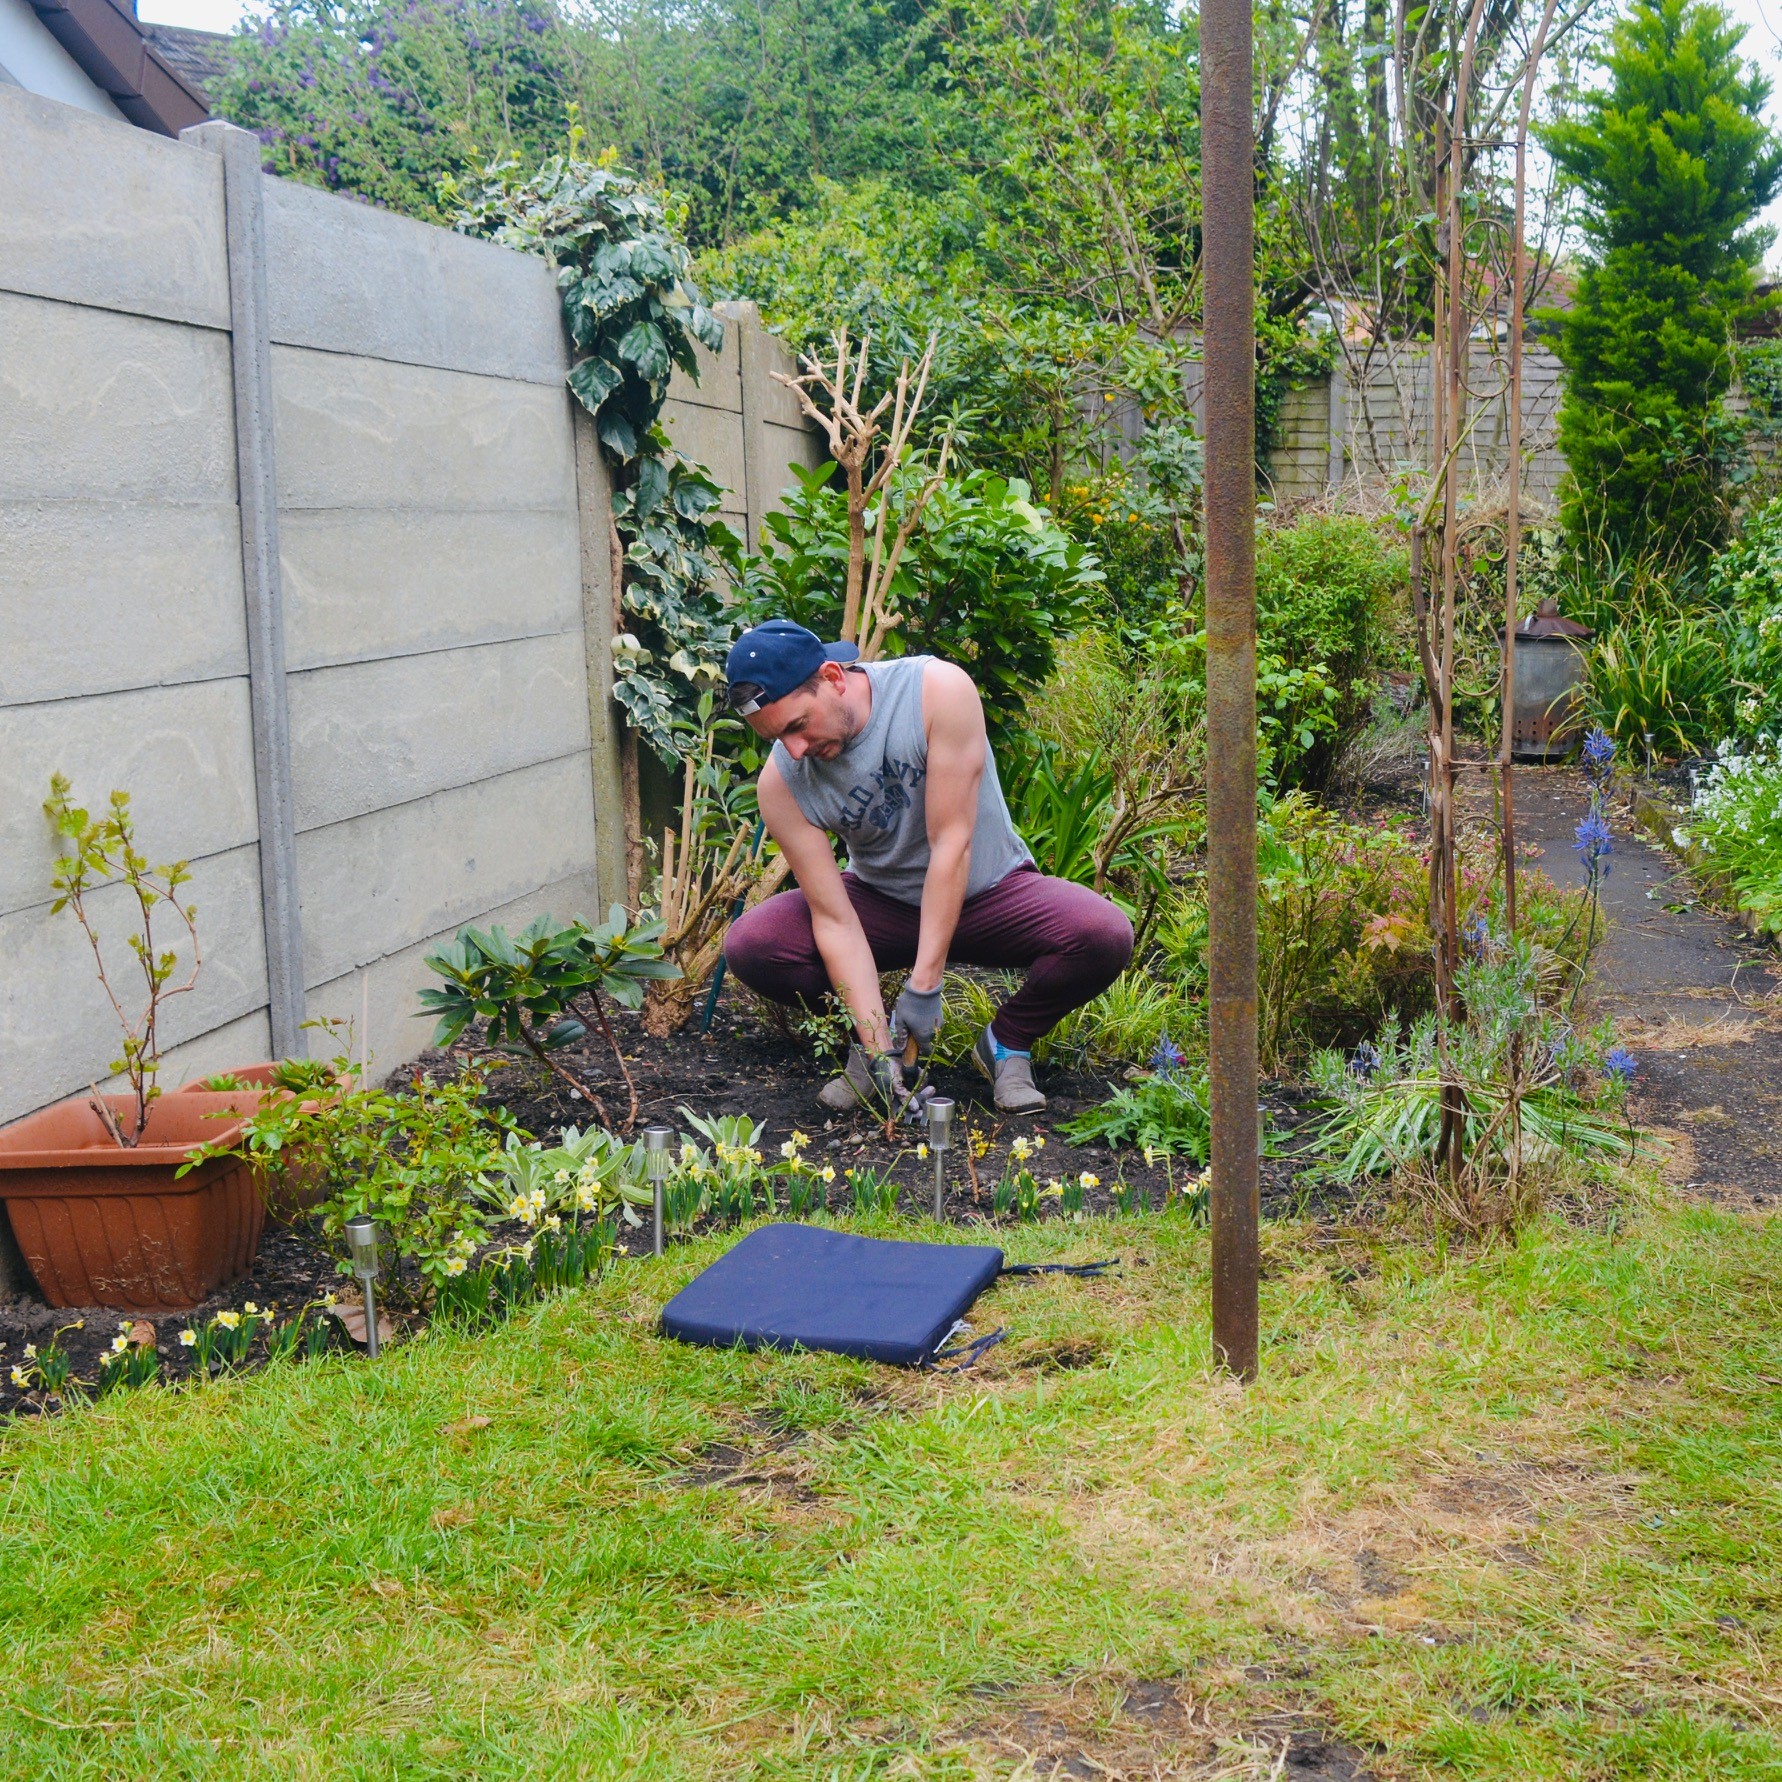 Peter Meager digging in the garden